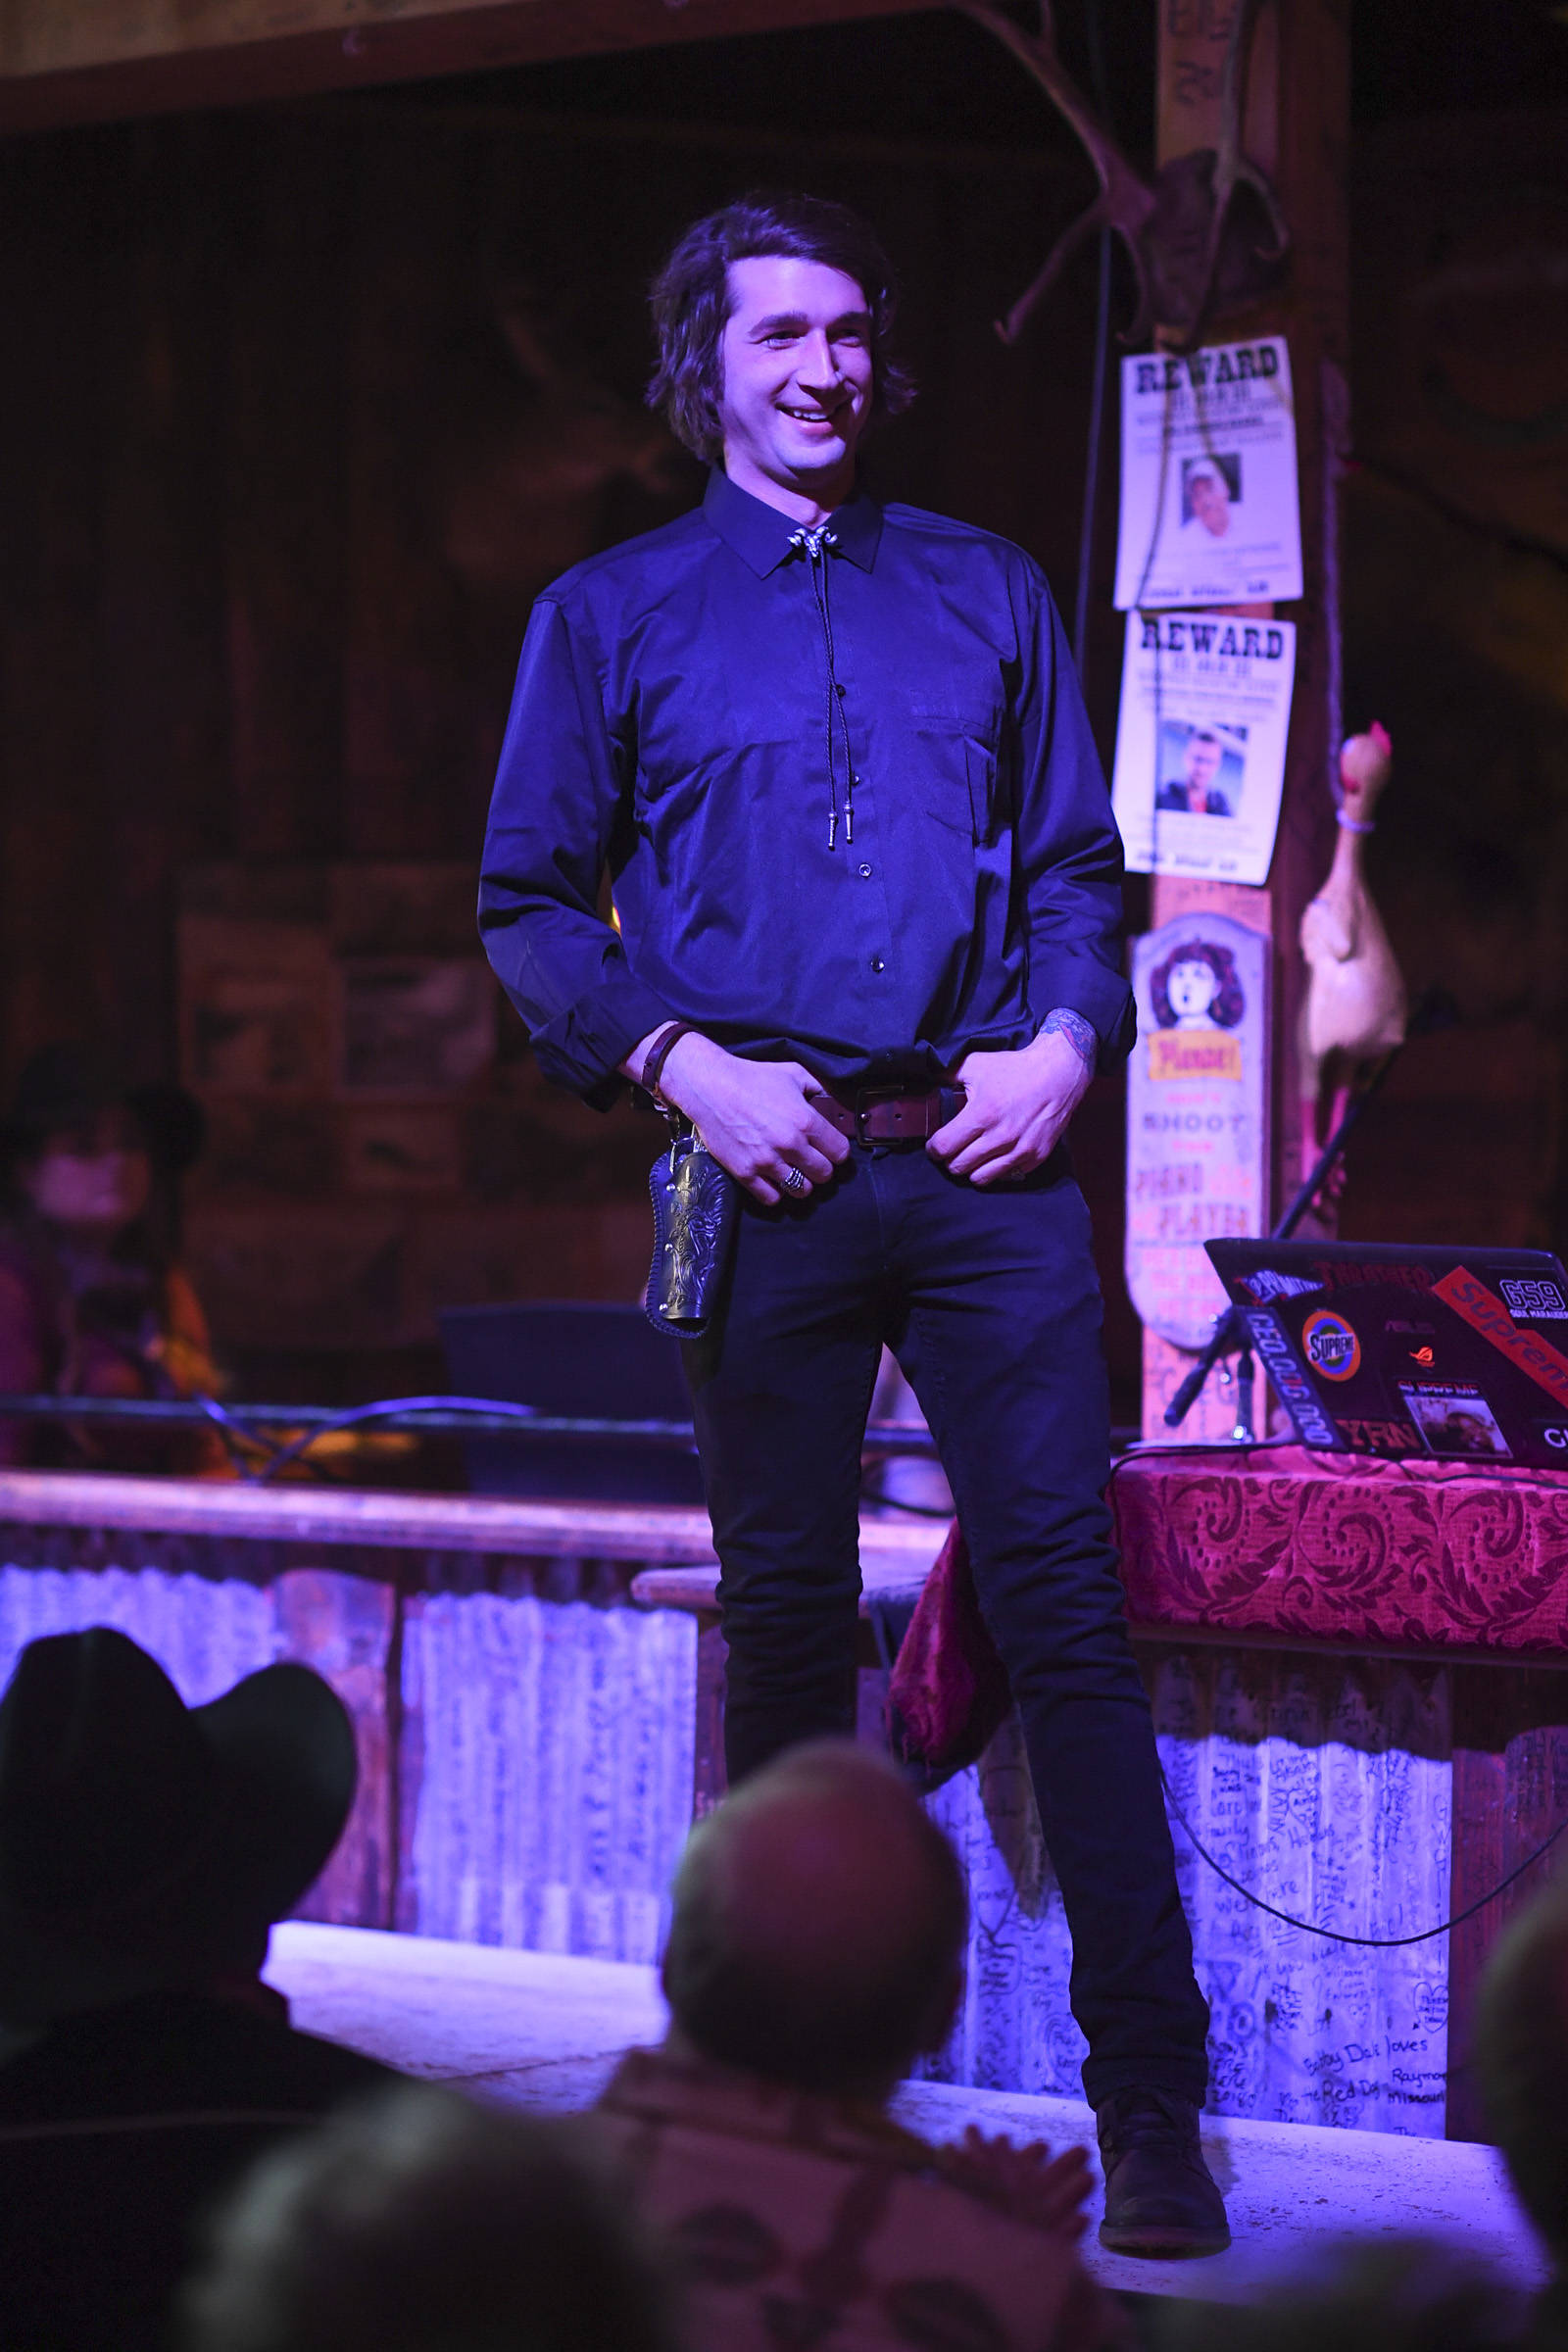 Men’s clothing from 4th Coast Outfitters is modeled on stage during the Juneau Rotaract’s Wild West Roundup Fashion Show at the Red Dog Saloon on Saturday, April 27, 2019. (Michael Penn | Juneau Empire)